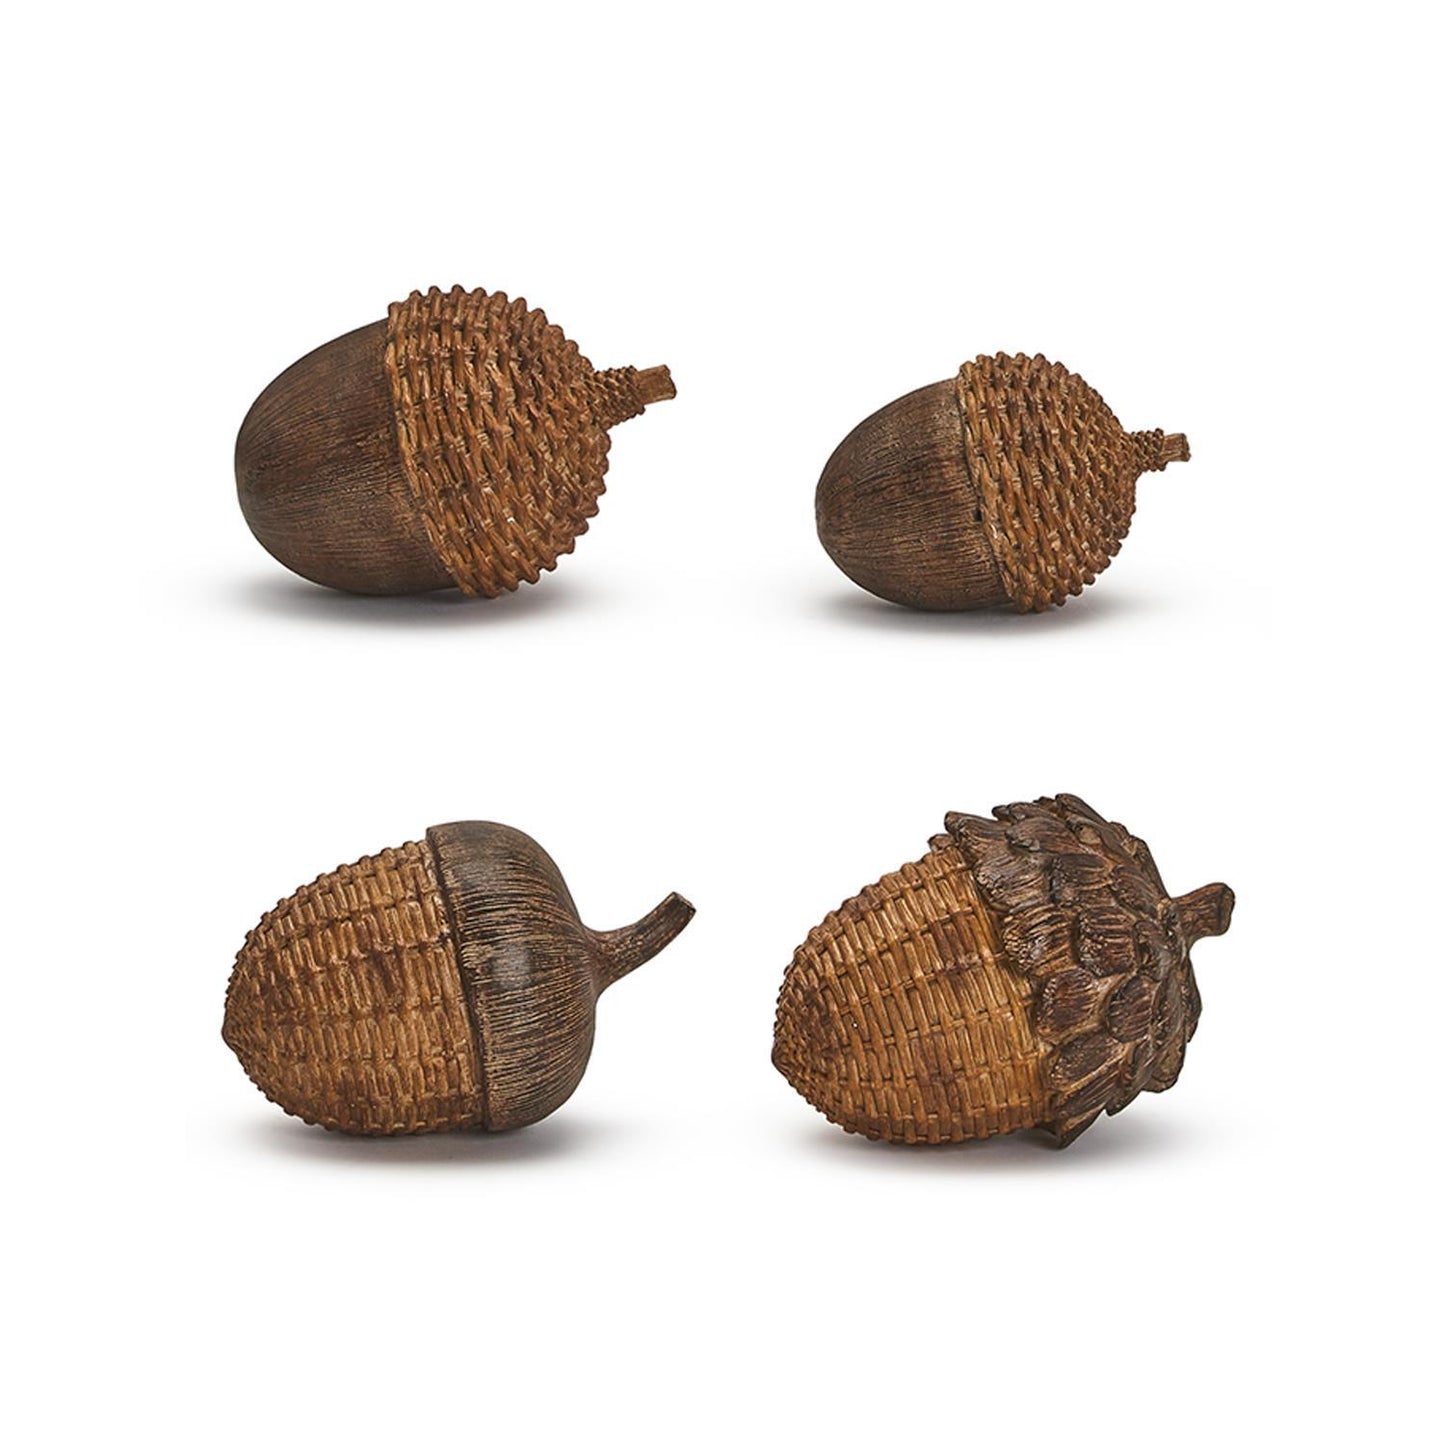 Two's Forest Bounty Set Of 4 Acorn Decor w/ Basketweave Pattern Accent